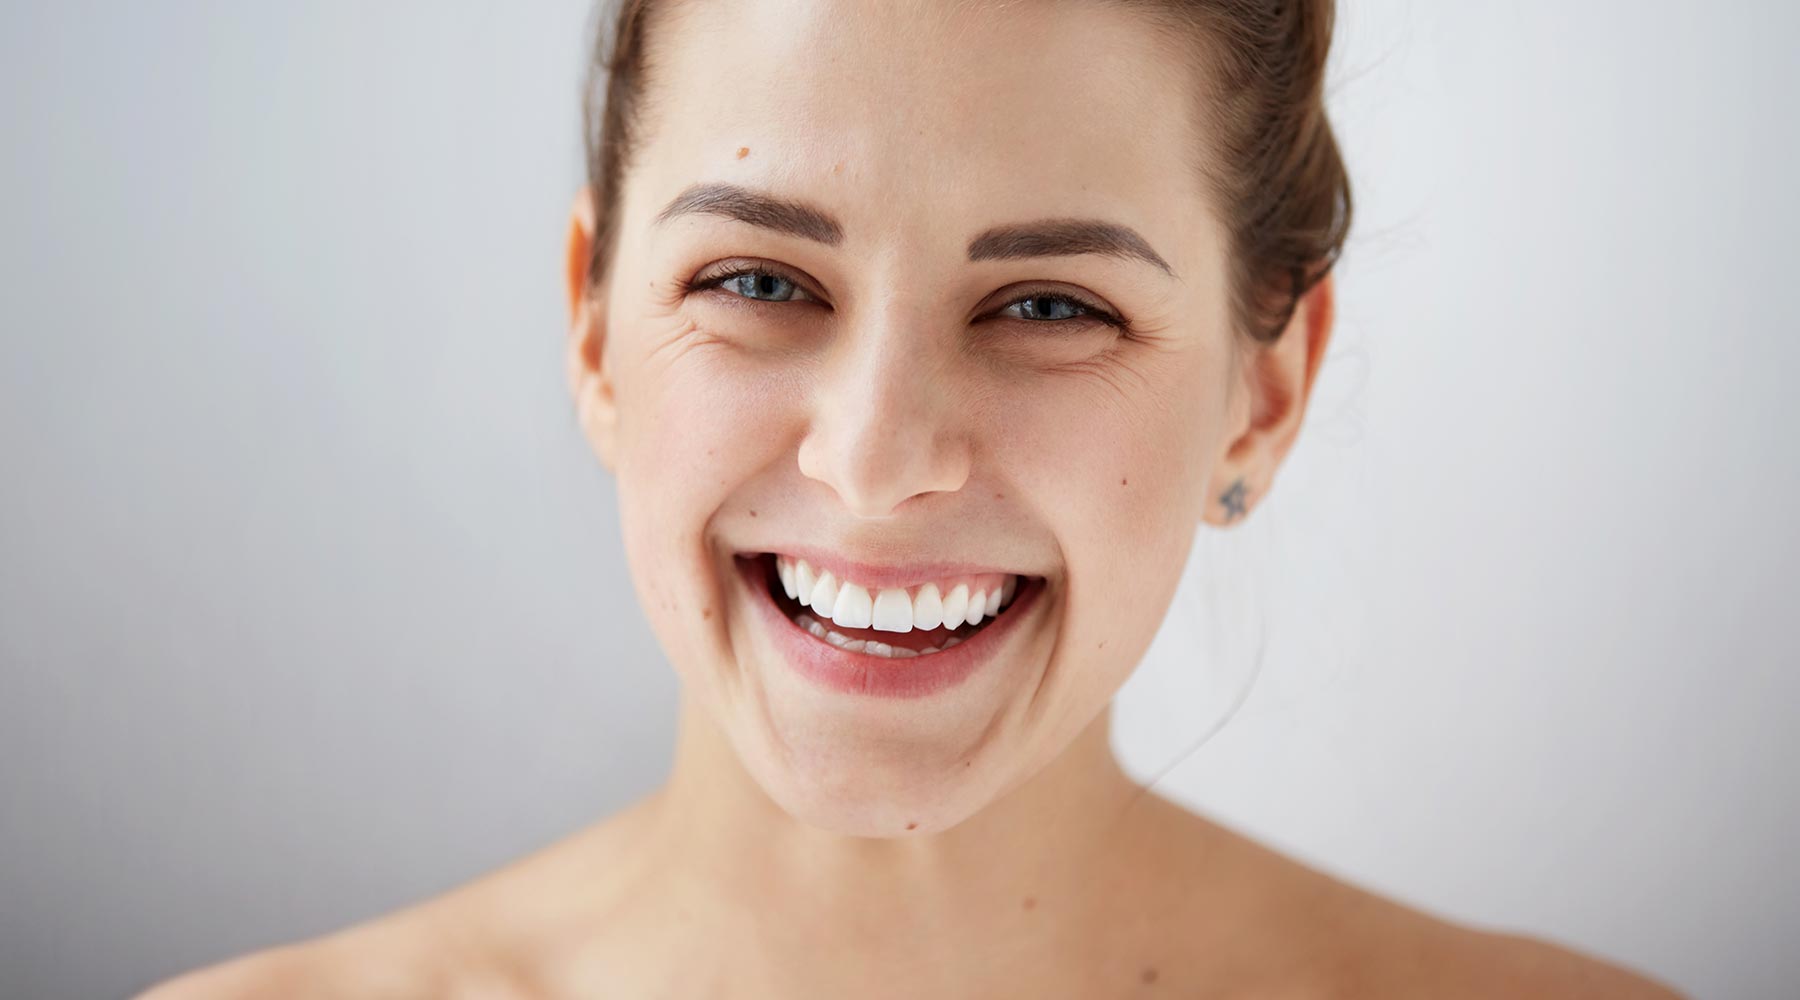 Creating your perfect smile with composite bonding